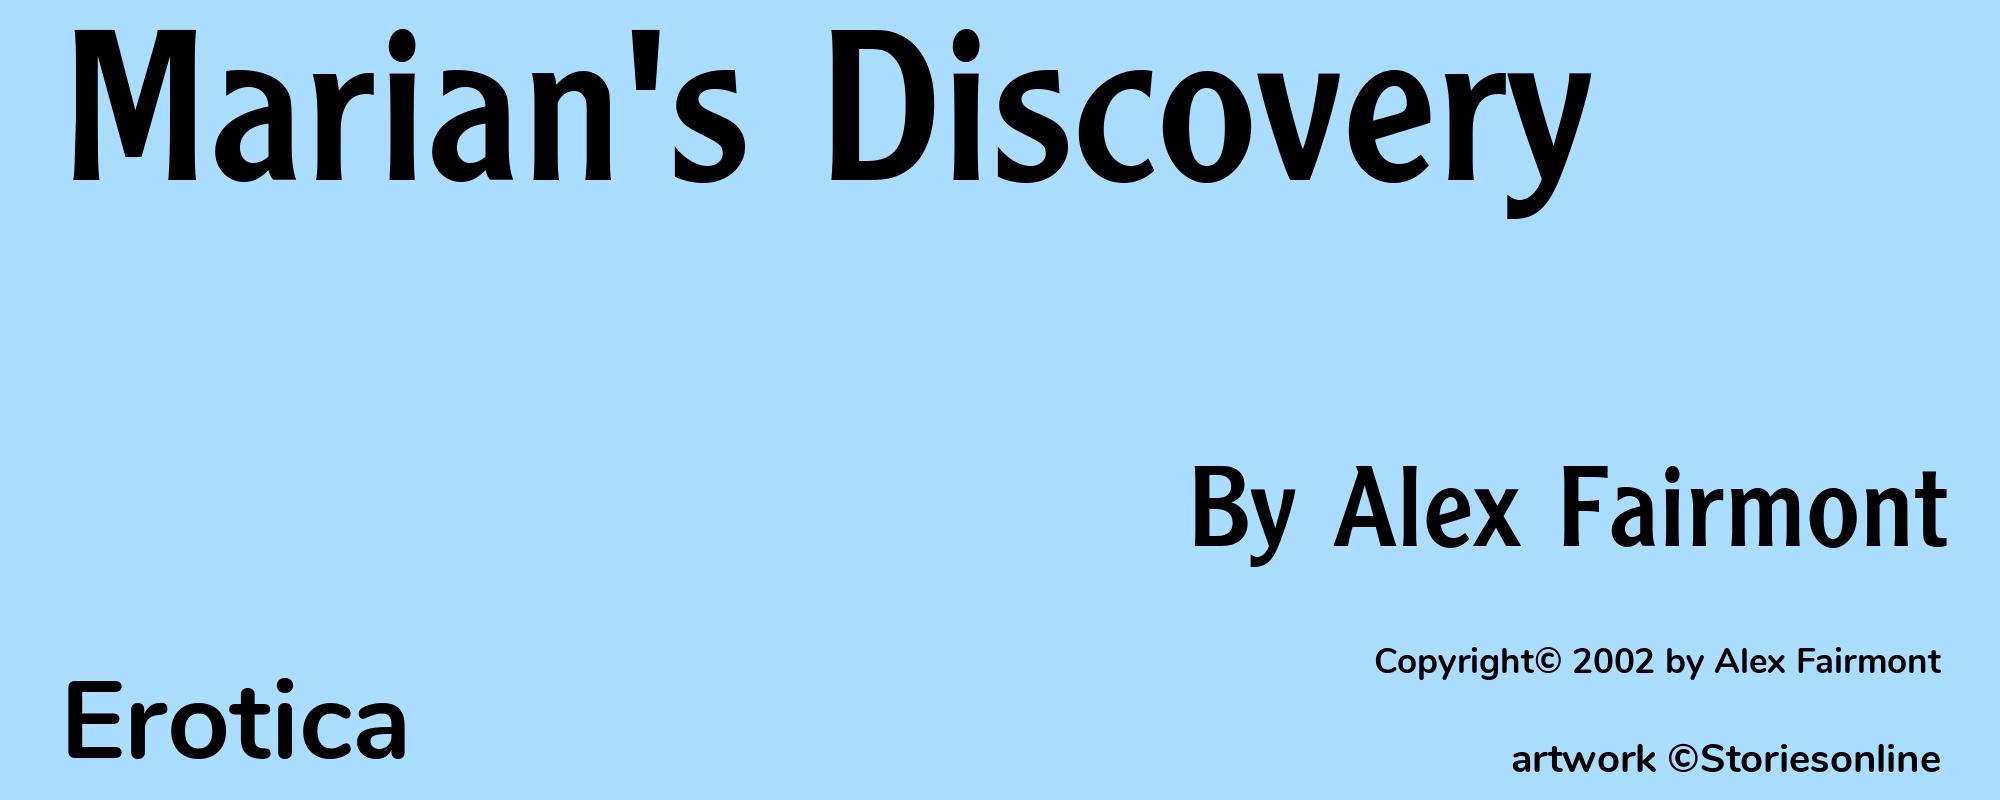 Marian's Discovery - Cover